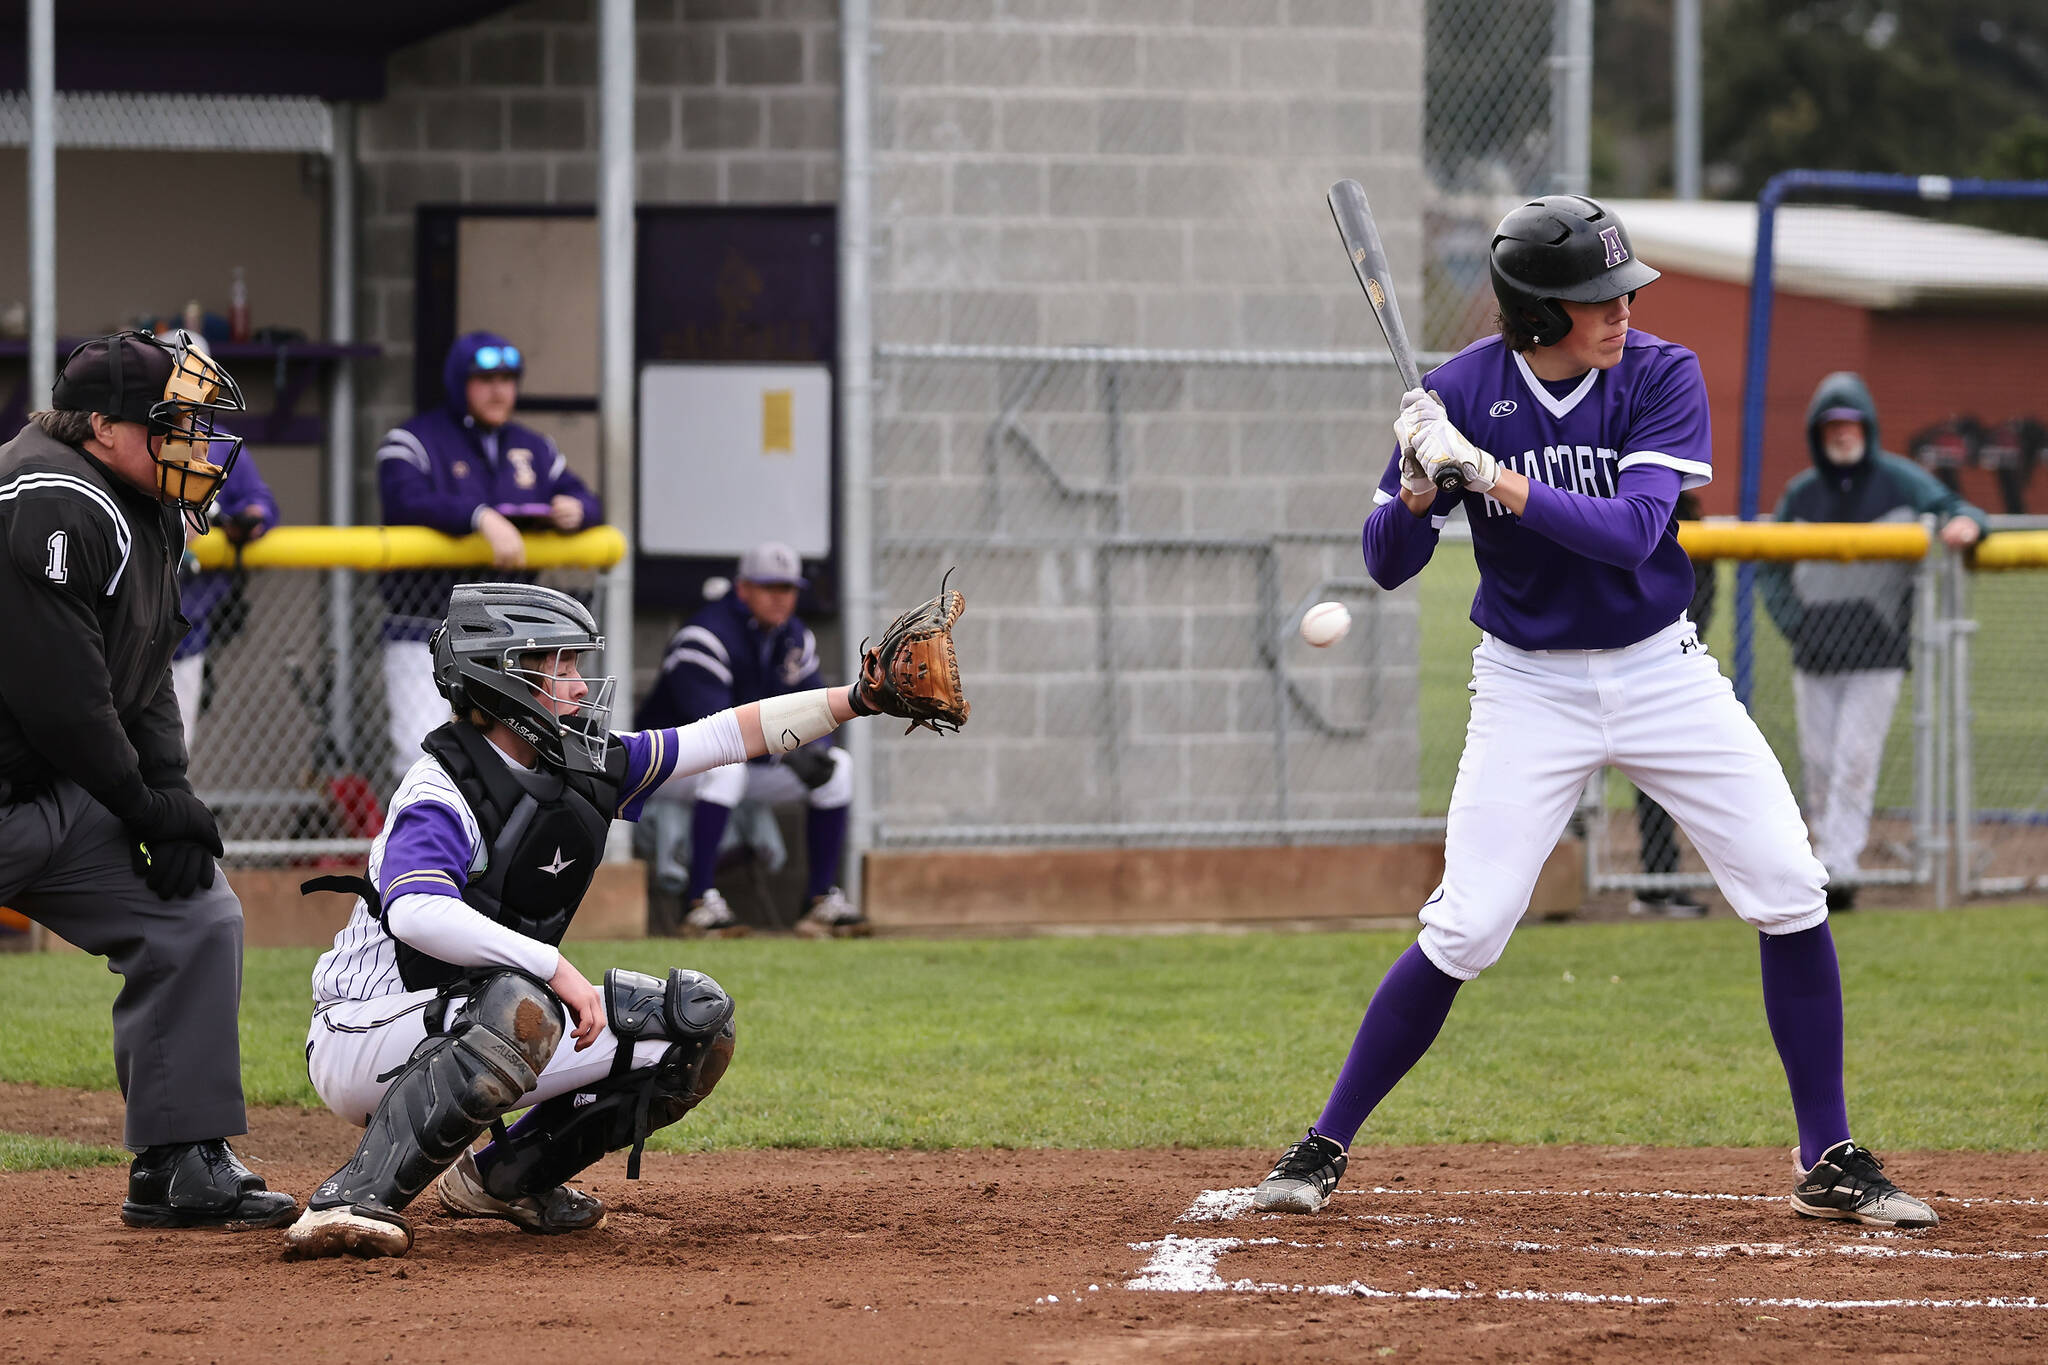 Photo by John Fisken
Parker Anderson catches a pitch missed by an Anacortes player during a baseball game April 4. Oak Harbor won after a close game.